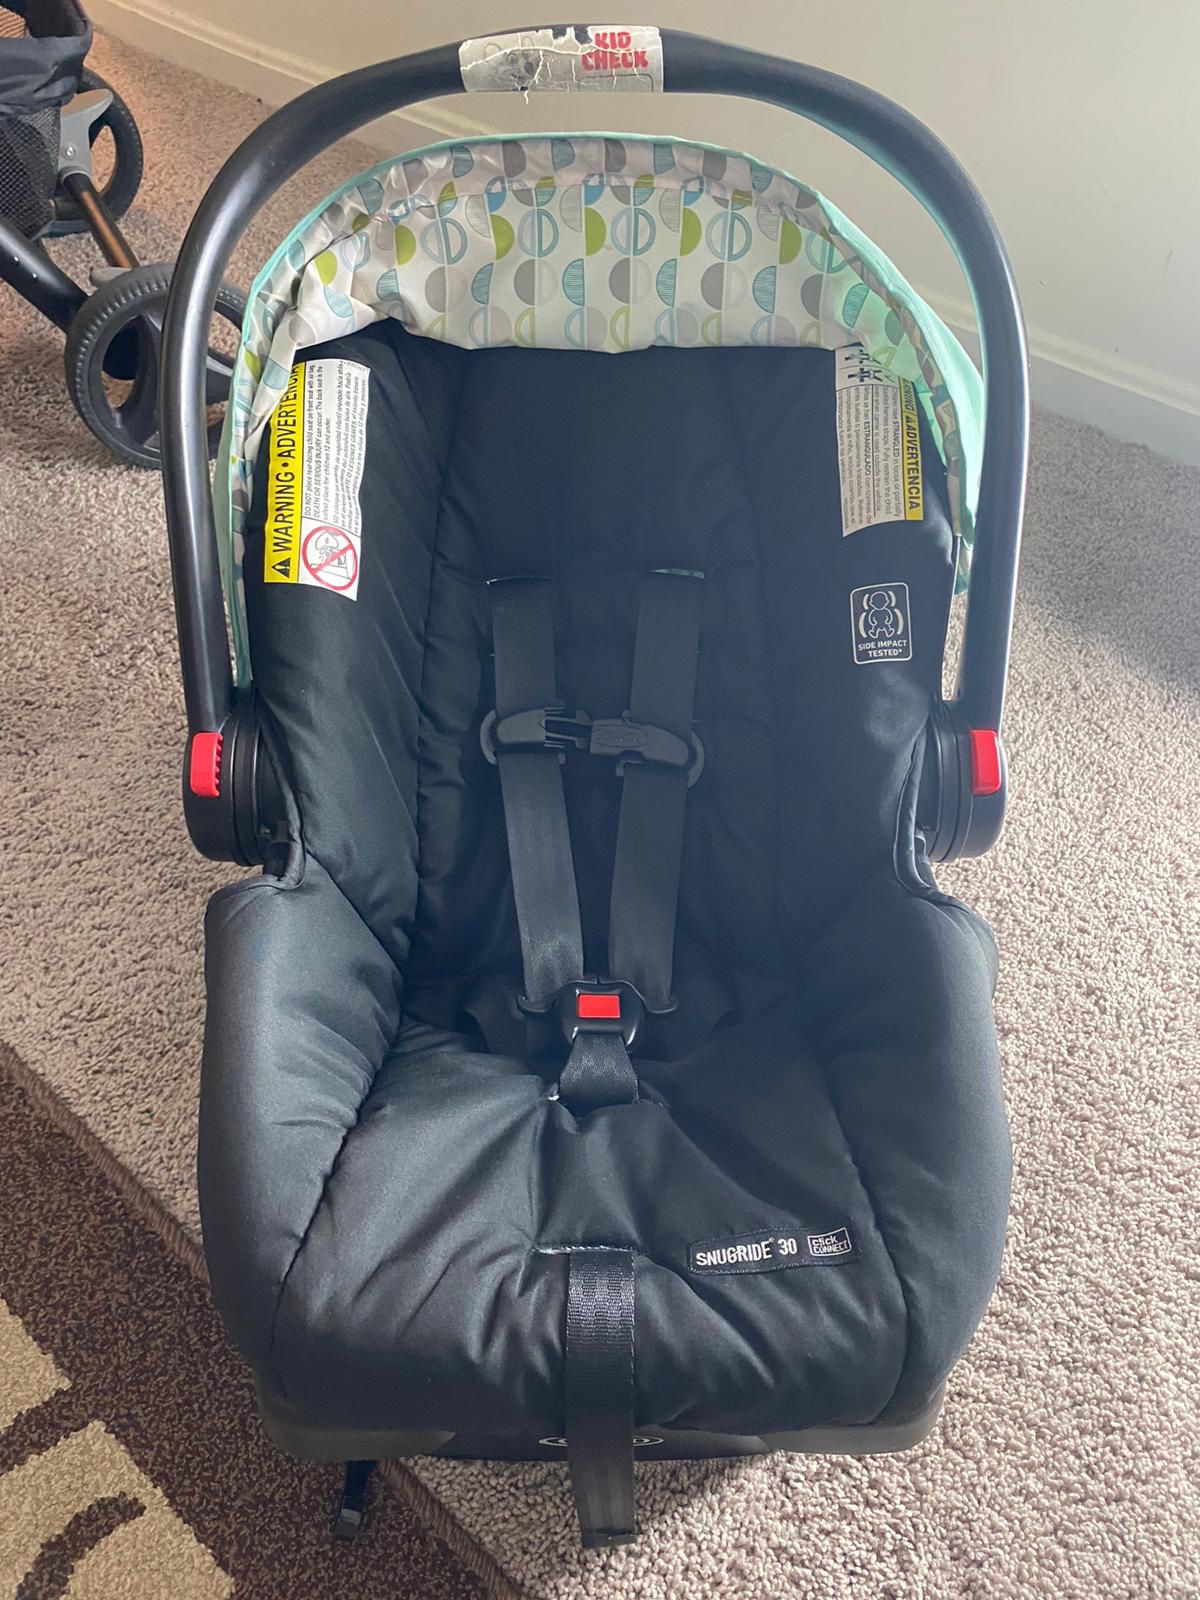 Stroller and car seat with base